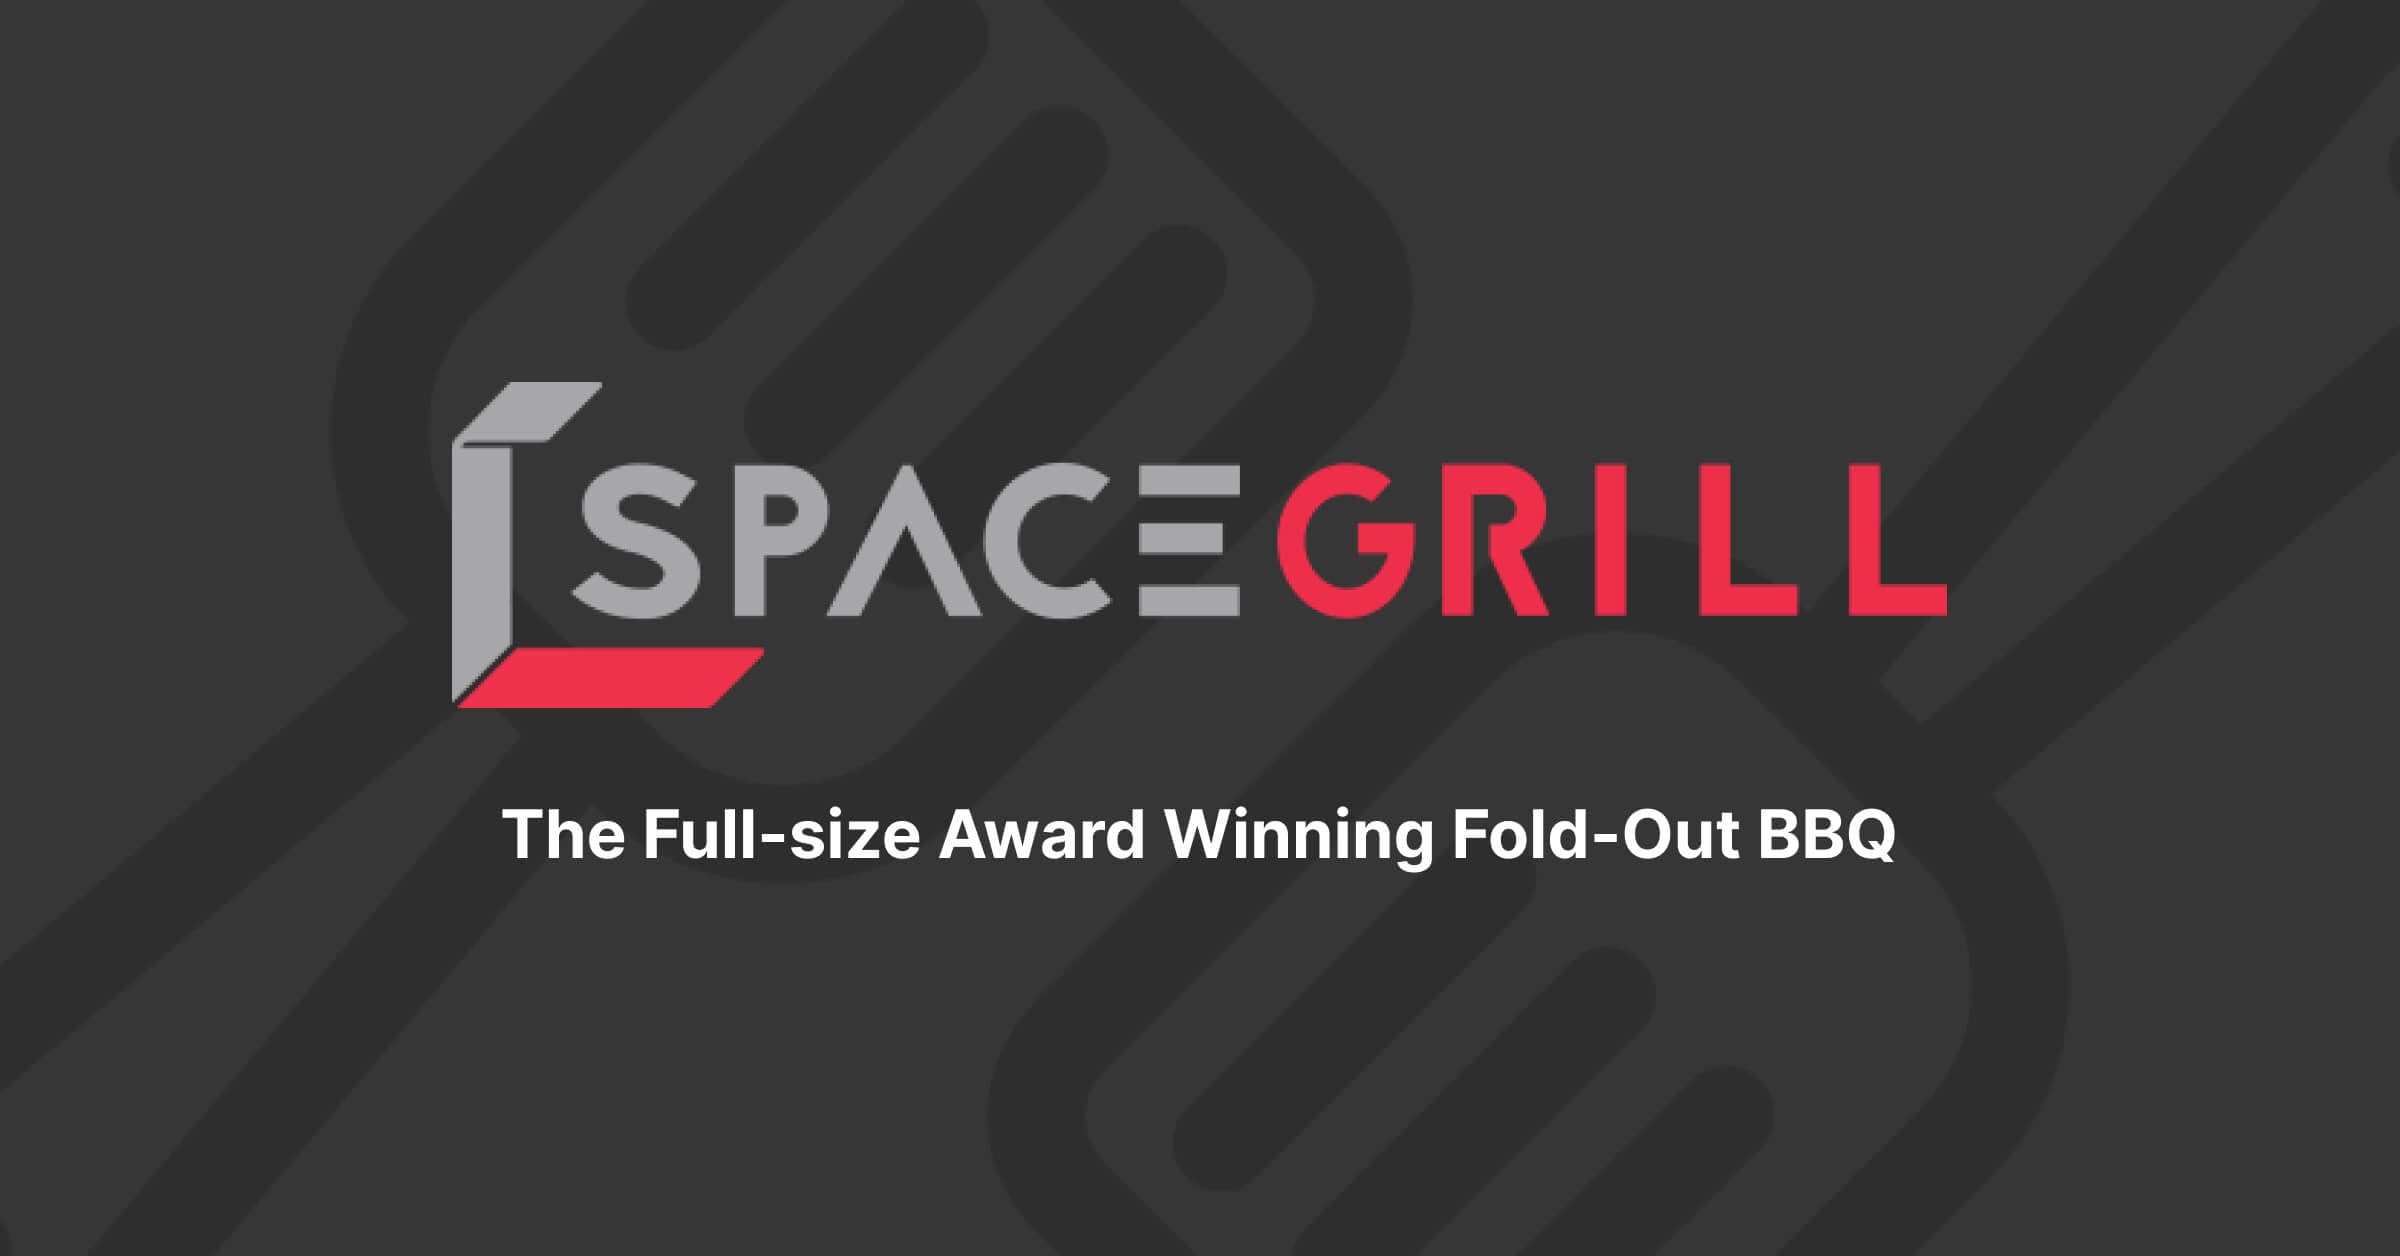 Space Grill - Award Winning Fold Out BBQ